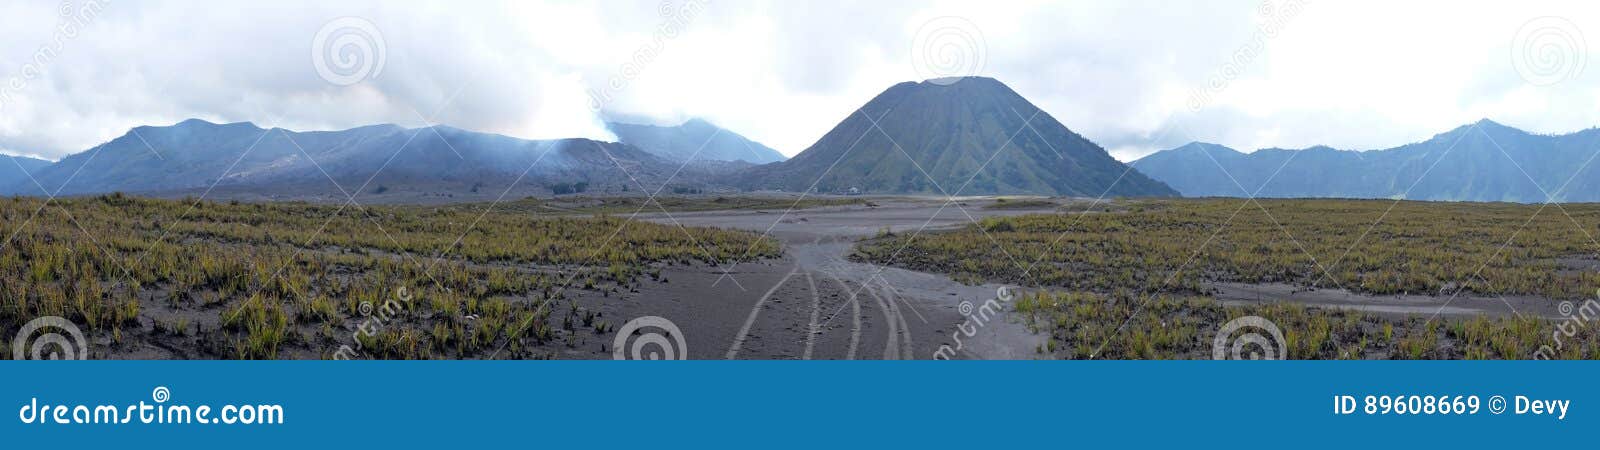 panorama from the vulcanic area at the bromo vulcano on java indonesia